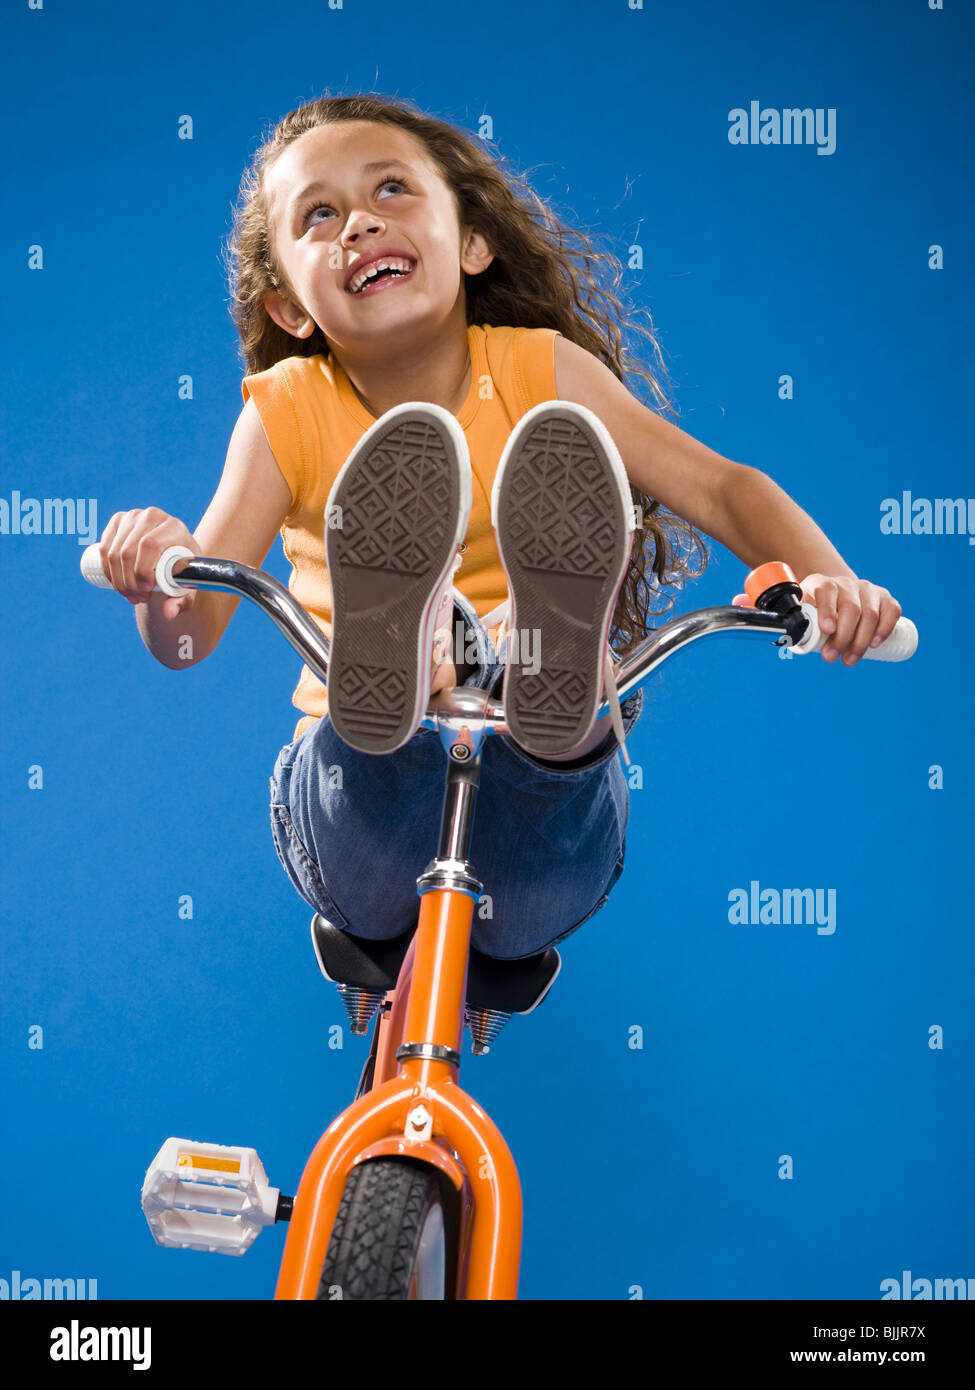 Female Riding Bicycle With No Seat